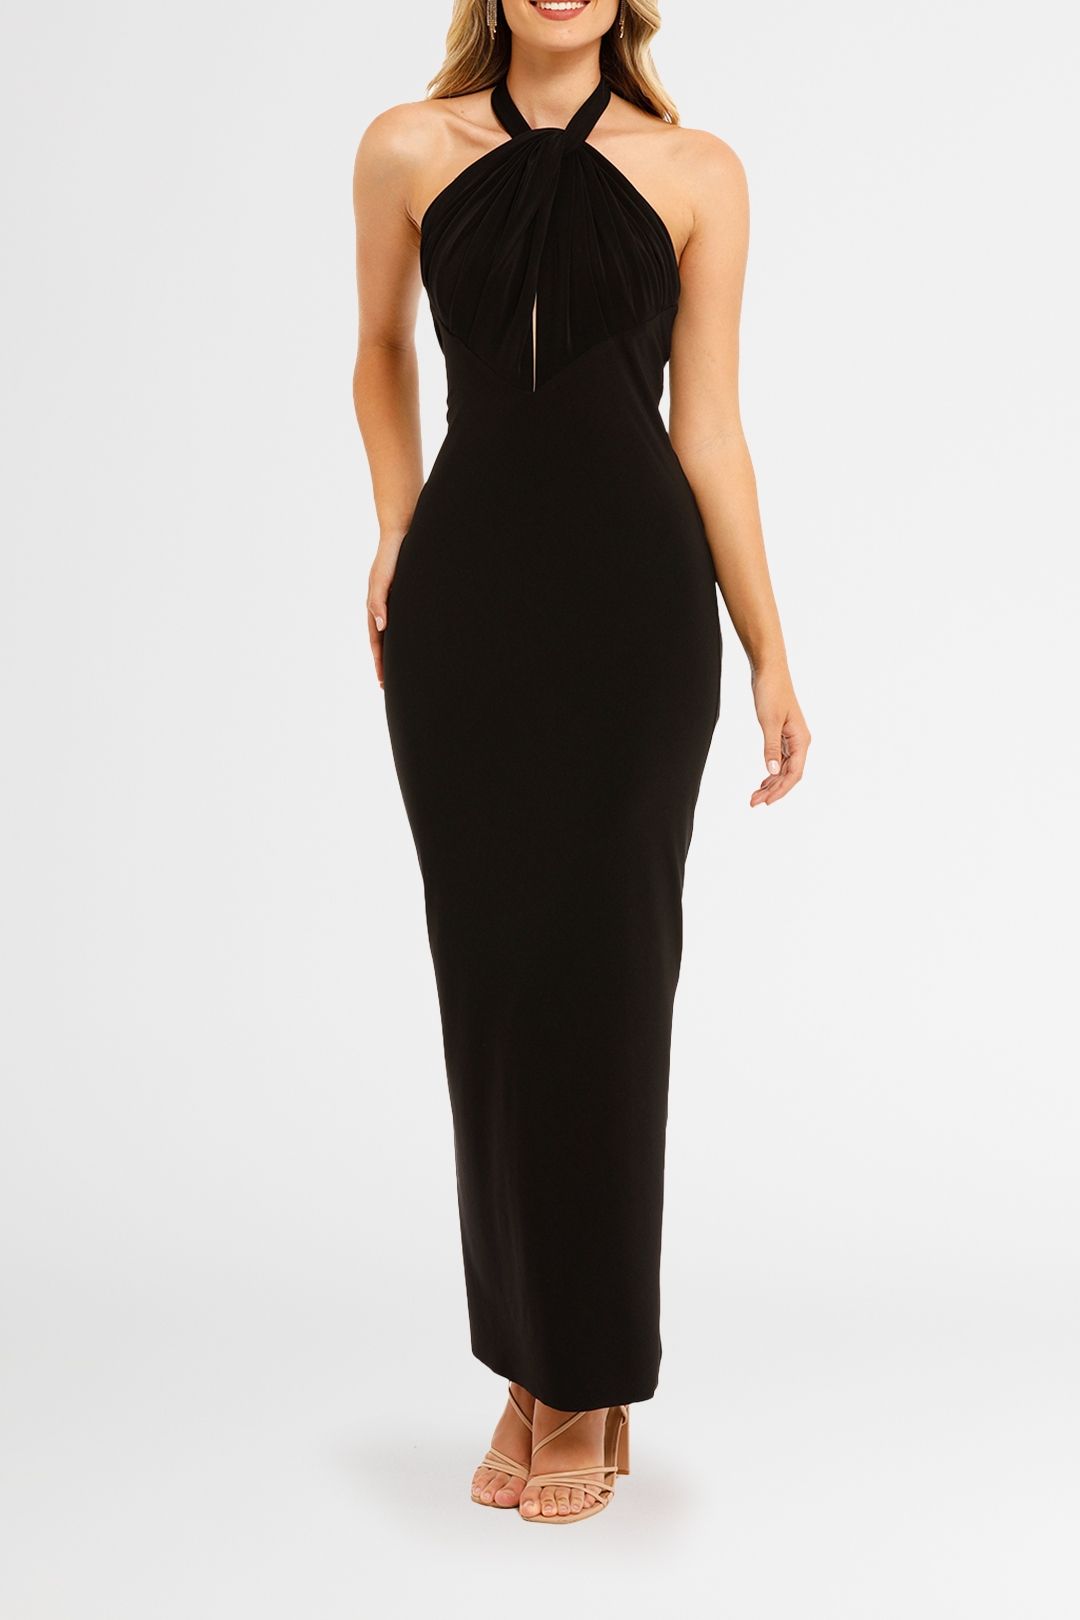 By Johnny Slip Knot Gown Black maxi